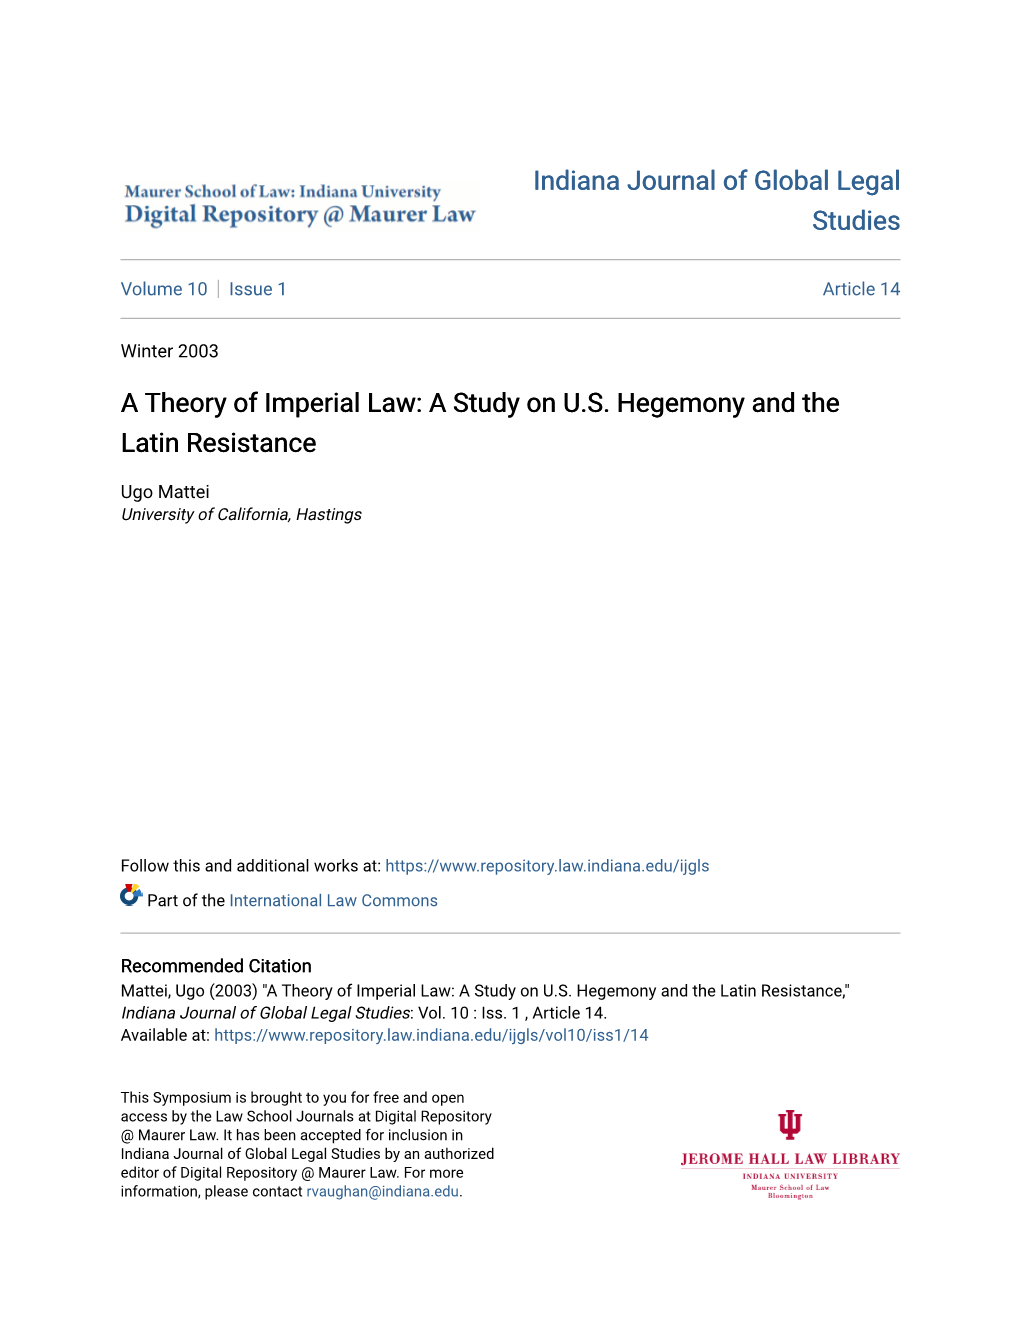 A Theory of Imperial Law: a Study on US Hegemony And